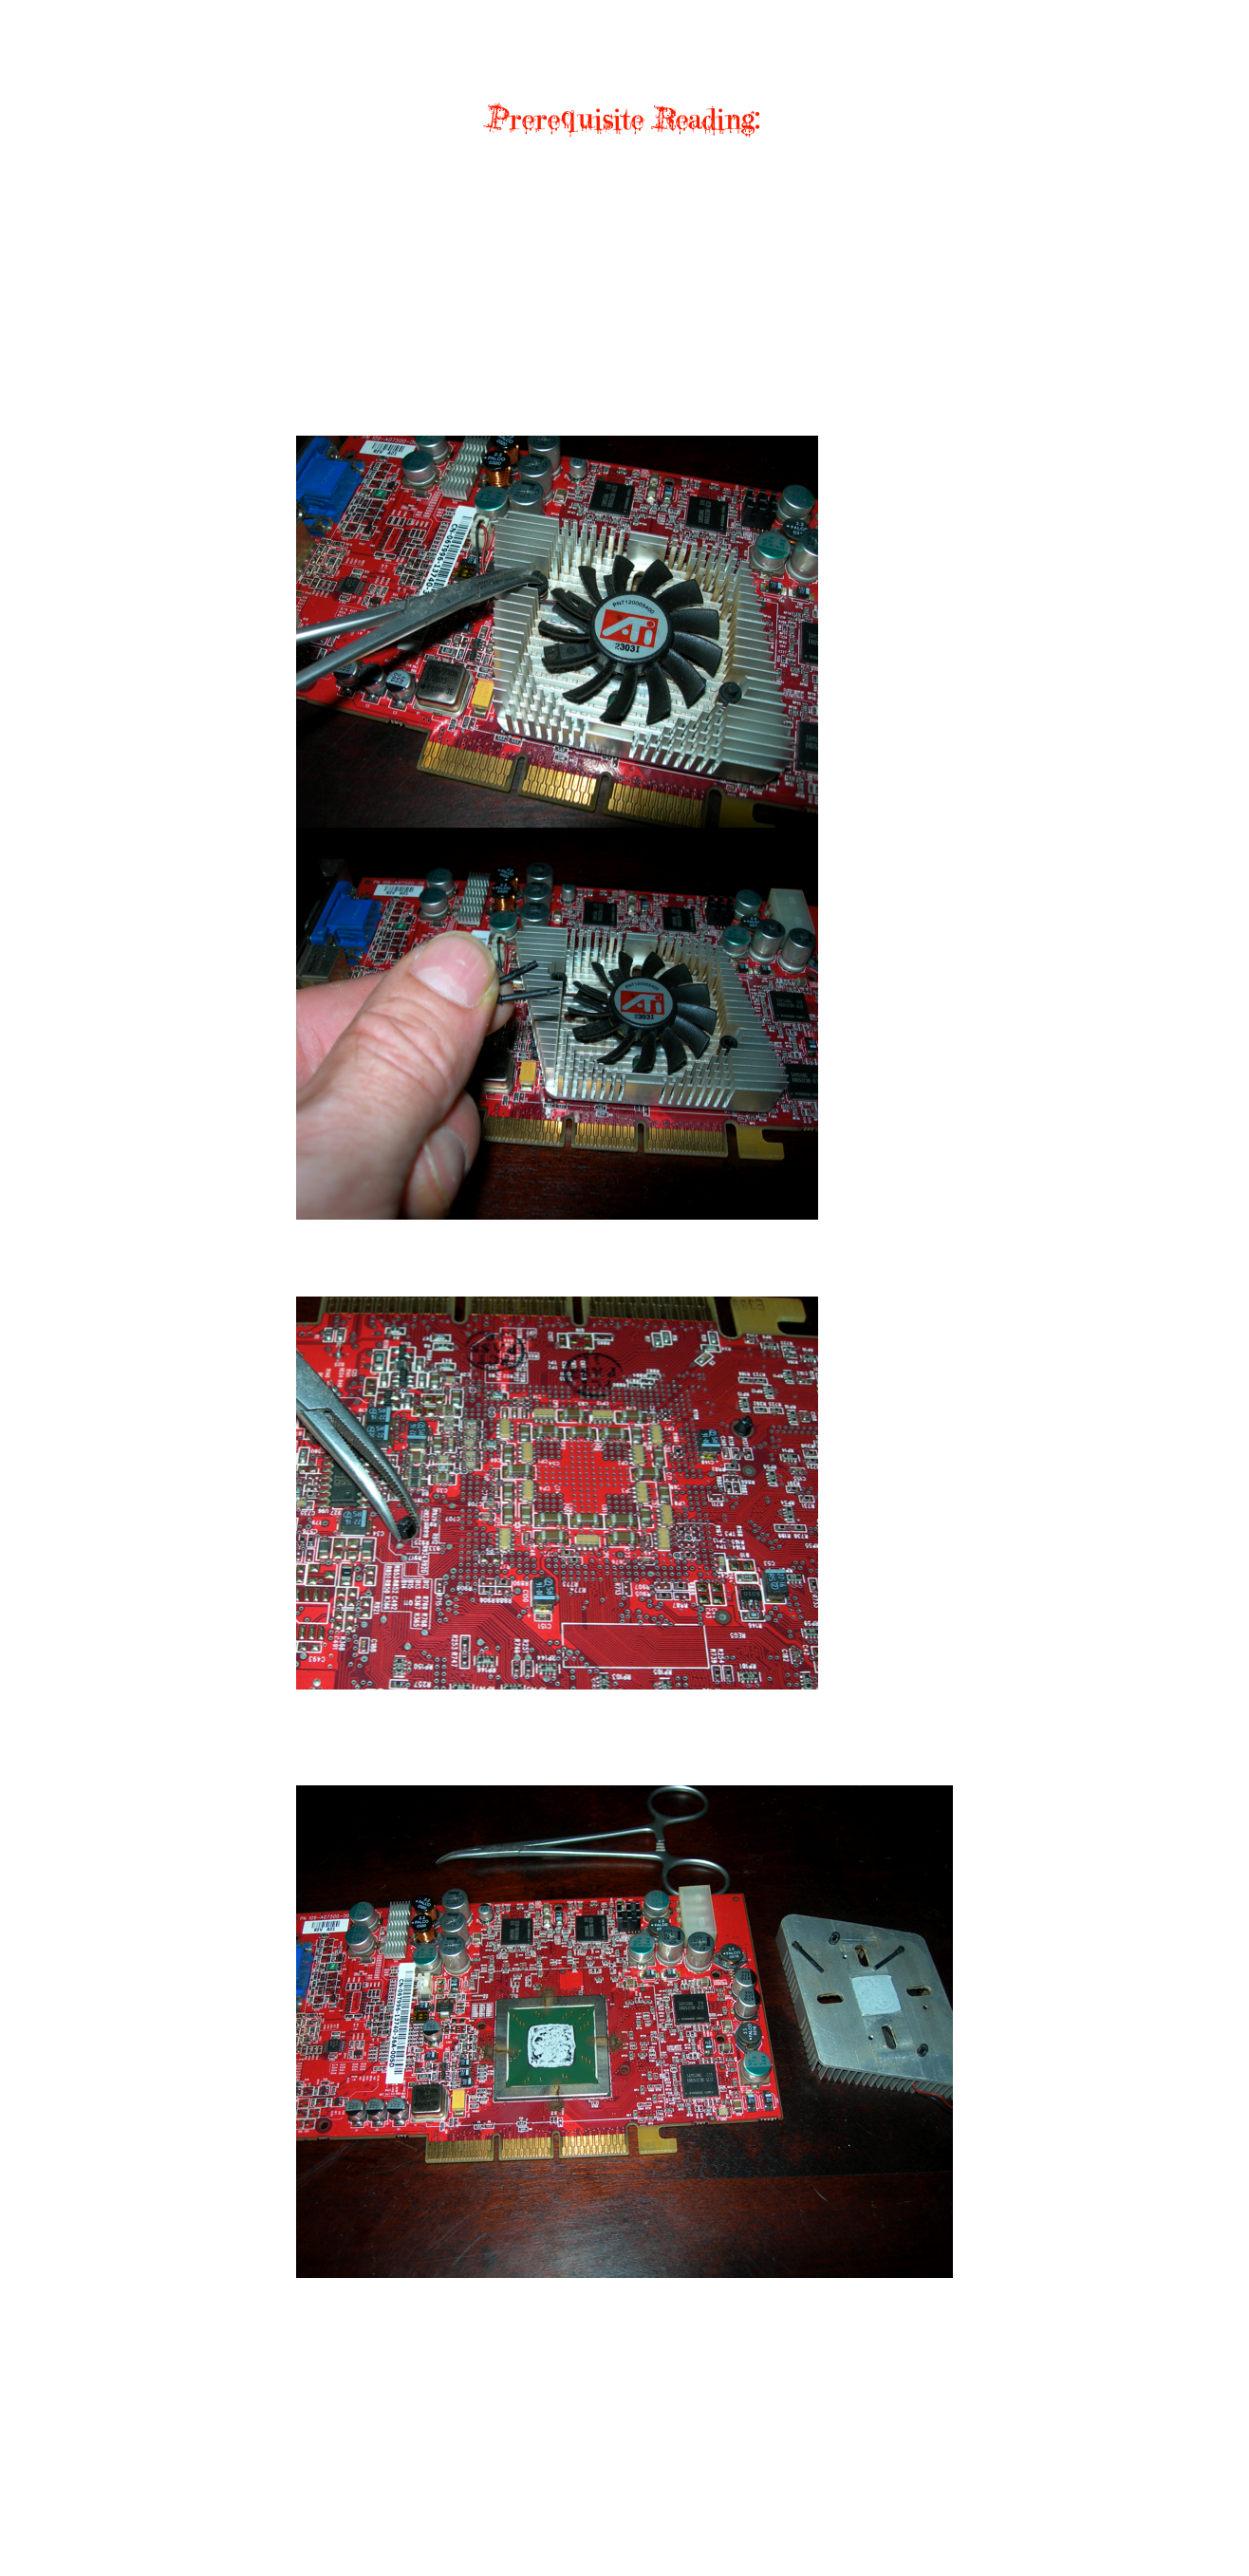 
This article focuses on the Radeon 9800 Pro.


Prerequisite Reading:
Graphics Card Cleaning and Thermal Compound Replacement



After removing the graphics card from the machine, use compressed air and a soft, static free nylon brush to blow and brush dust and dirt off the entire board.
After this, remove the fan/heat sink assembly.

First, disconnect the power connector from the graphics board.
Forceps or needle nose pliers will help.


To remove the 9800 Pro heat sink, use some forceps or needle nose pliers to pull the center pin of the retaining pegs out 

￼
￼

After pulling the two pins, flip the card over.
Use your forceps (or pliers) to squeeze the two retaining pegs to allow removal from the board:

￼

Once you have done this, flip the board over and remove the two pegs.
The heat sink may also come with the pegs.
Disassembly is complete.

￼

Now, once you have removed the thermal compound from the GPU and the heat sink, and have cleaned all dust, grease, etc., from the board, heat sink and fan as explained in the lead article, apply new thermal paste and reassemble.

Your computer, your graphics card and your wallet thank you!

